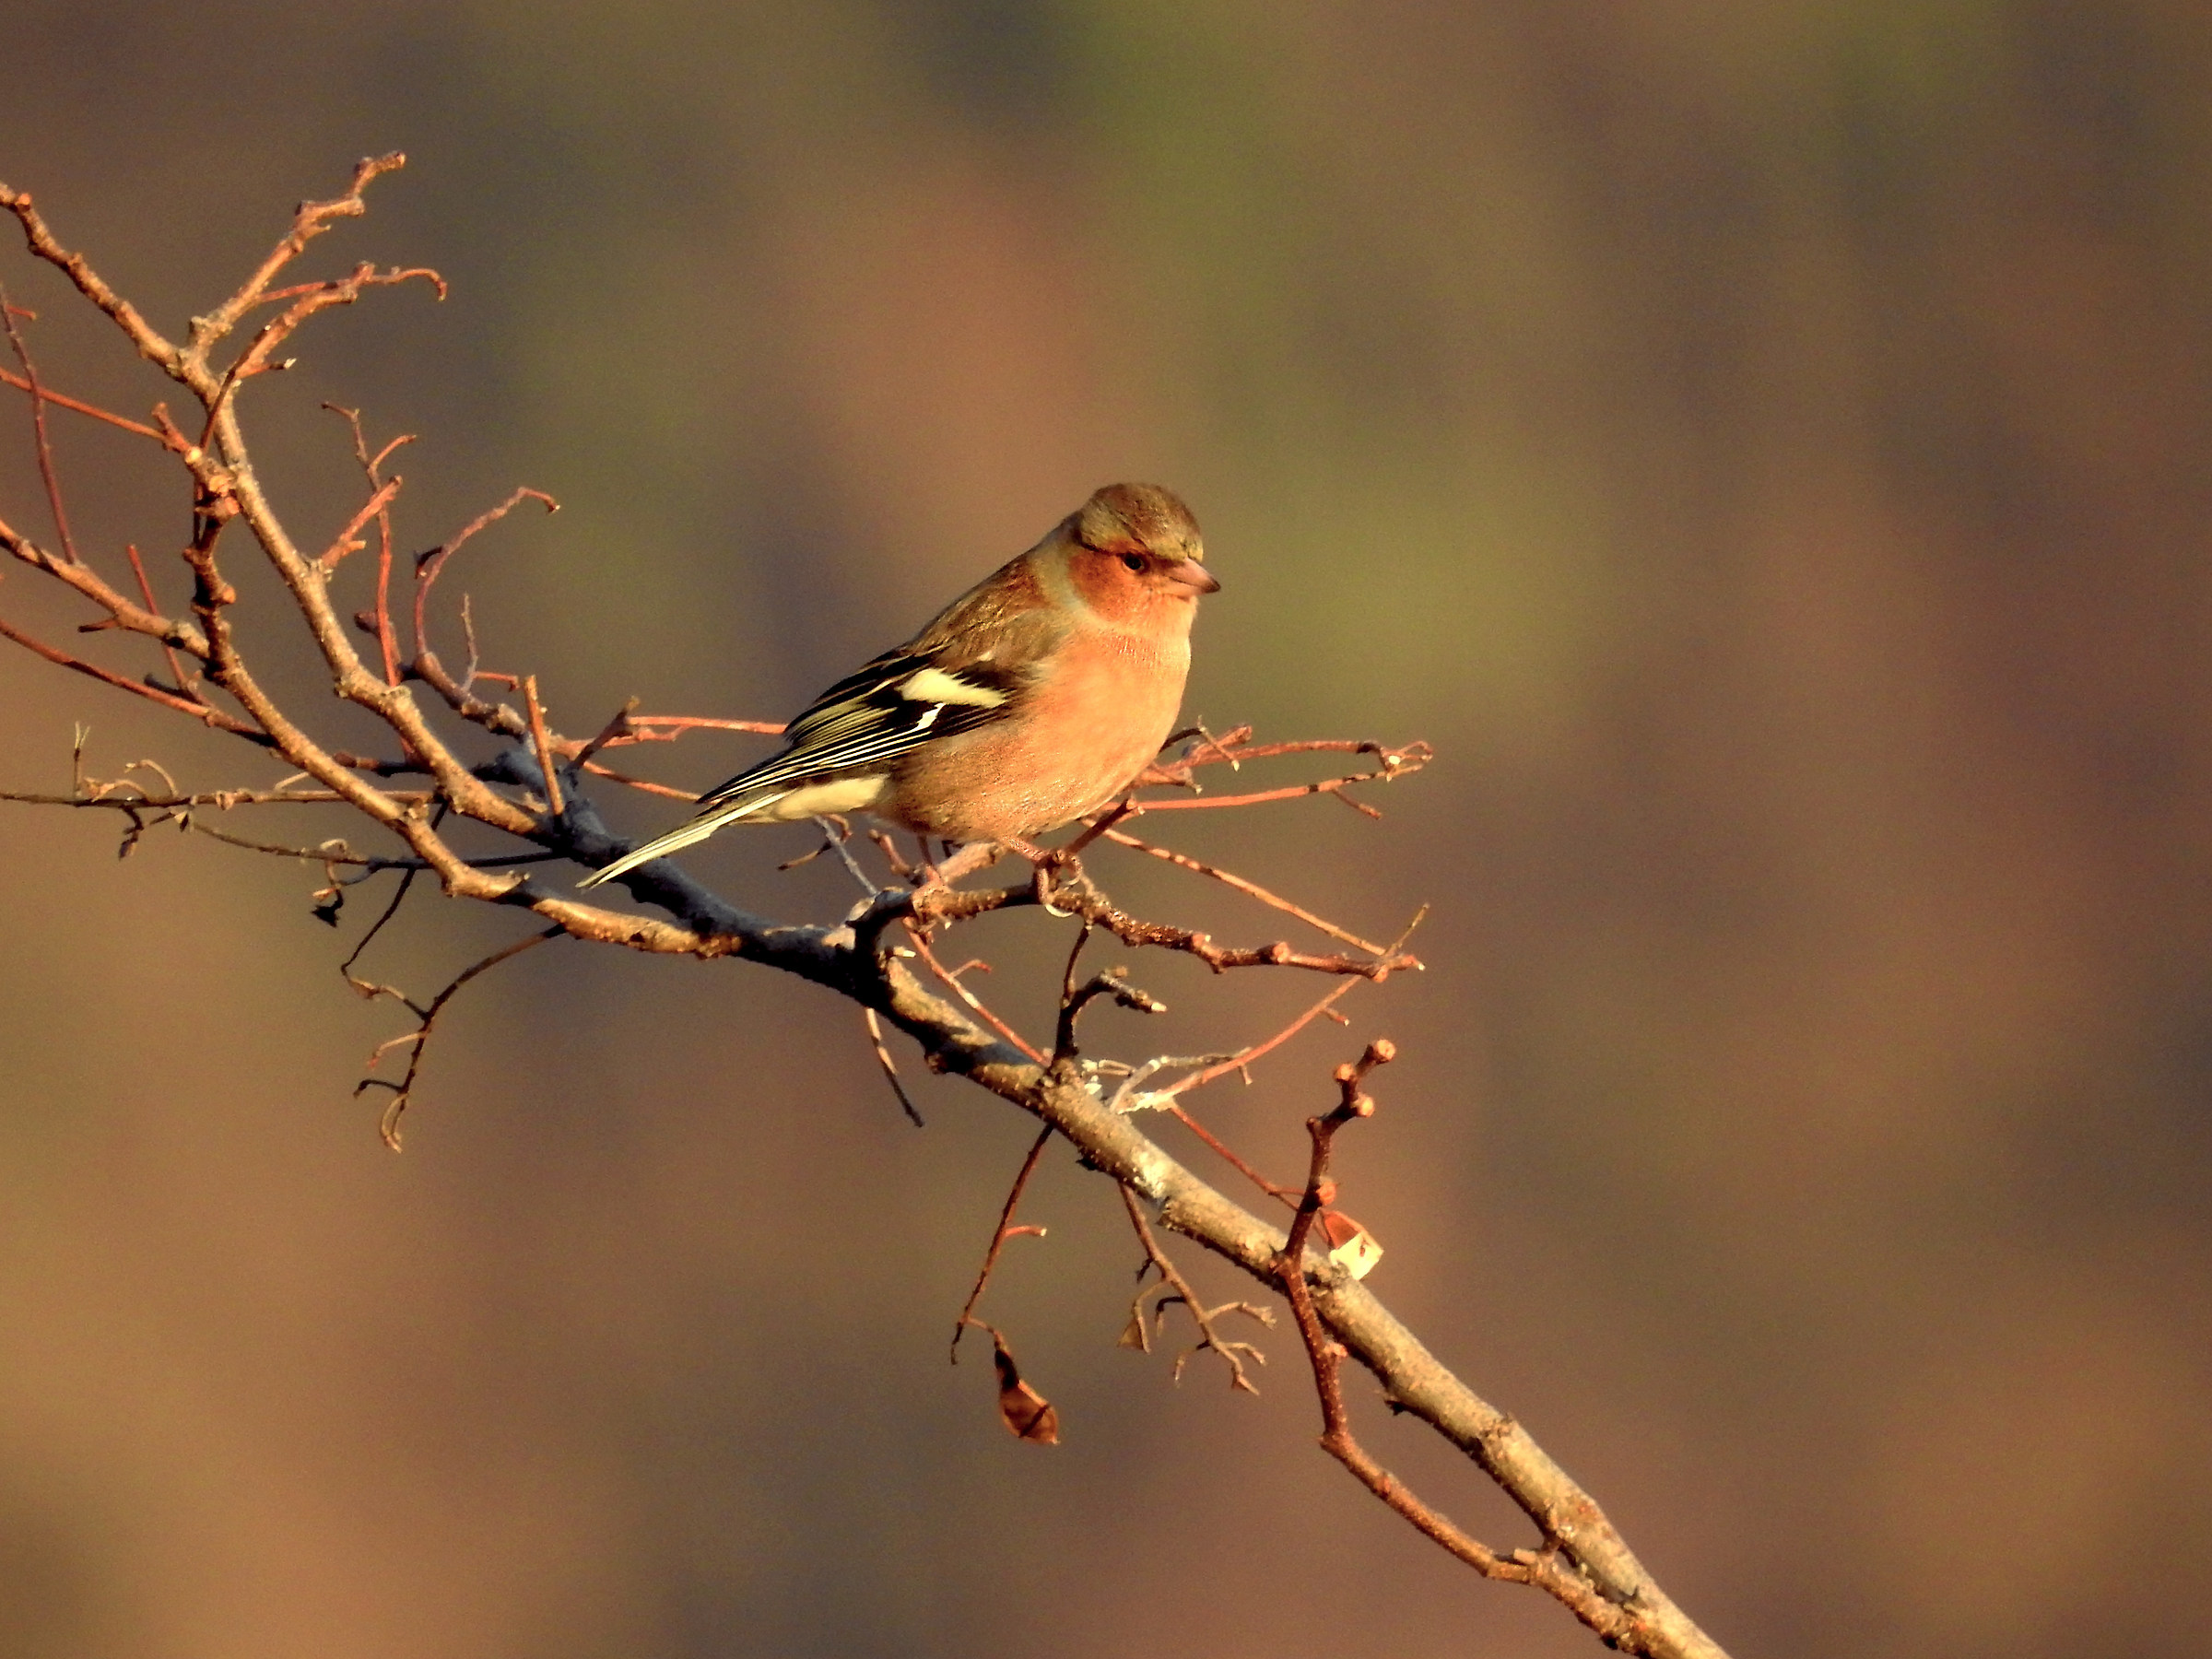 Finches at sunset...